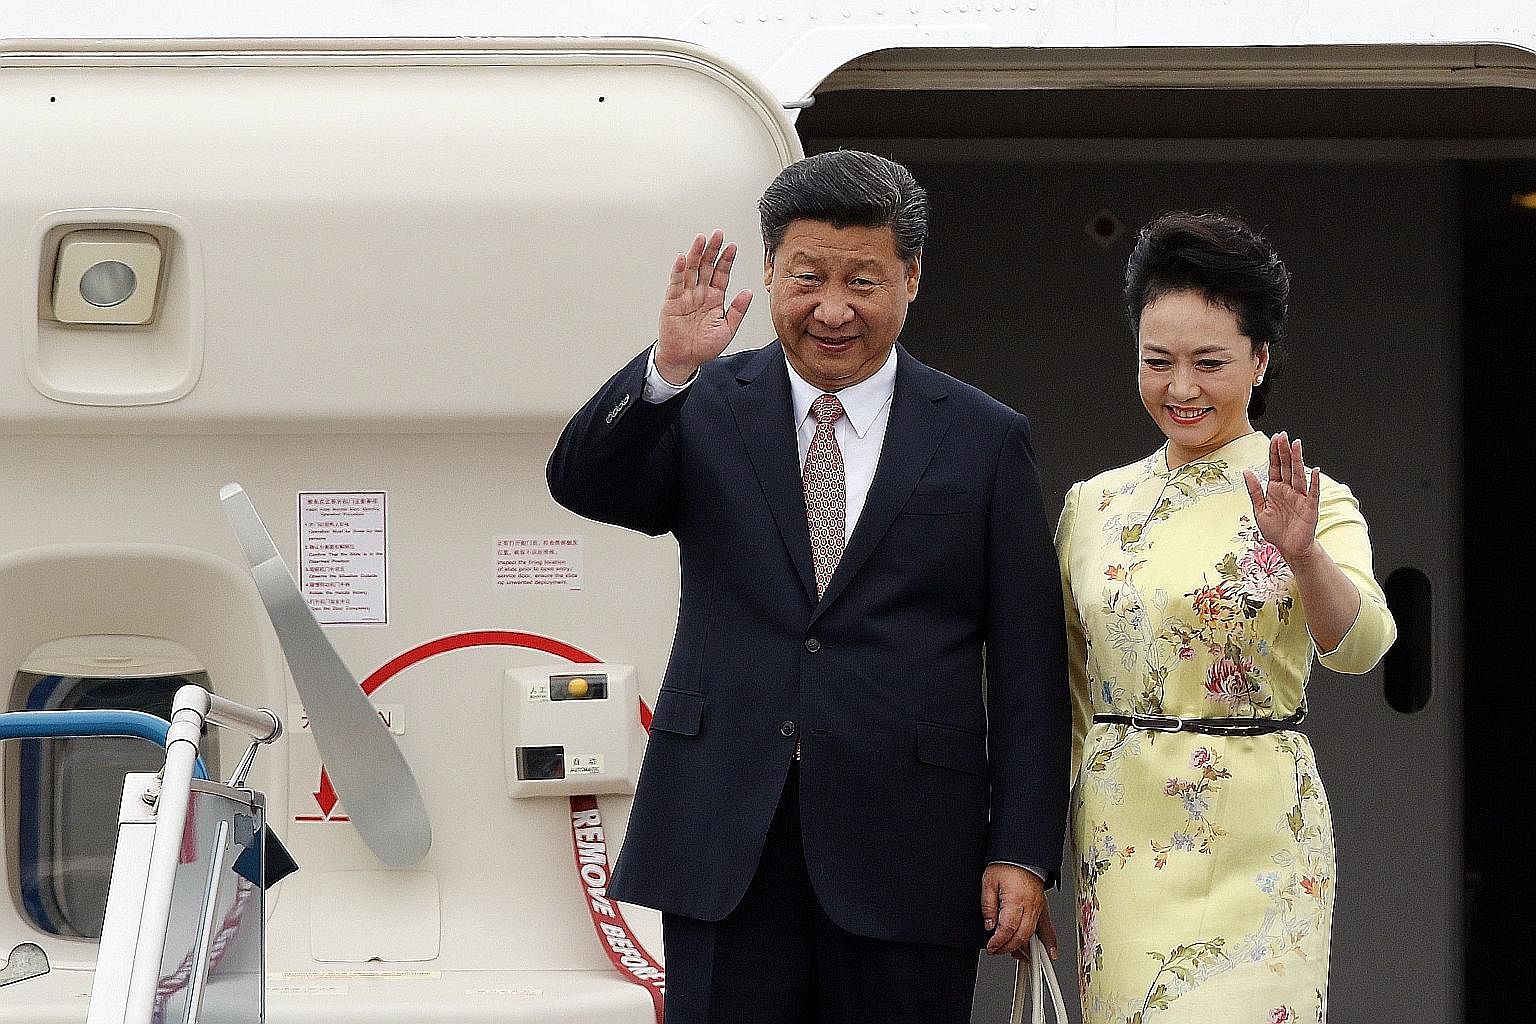 Chinese President Xi Jinping and his wife Peng Liyuan arriving in Hanoi yesterday. They are in Singapore today for a two-day visit.